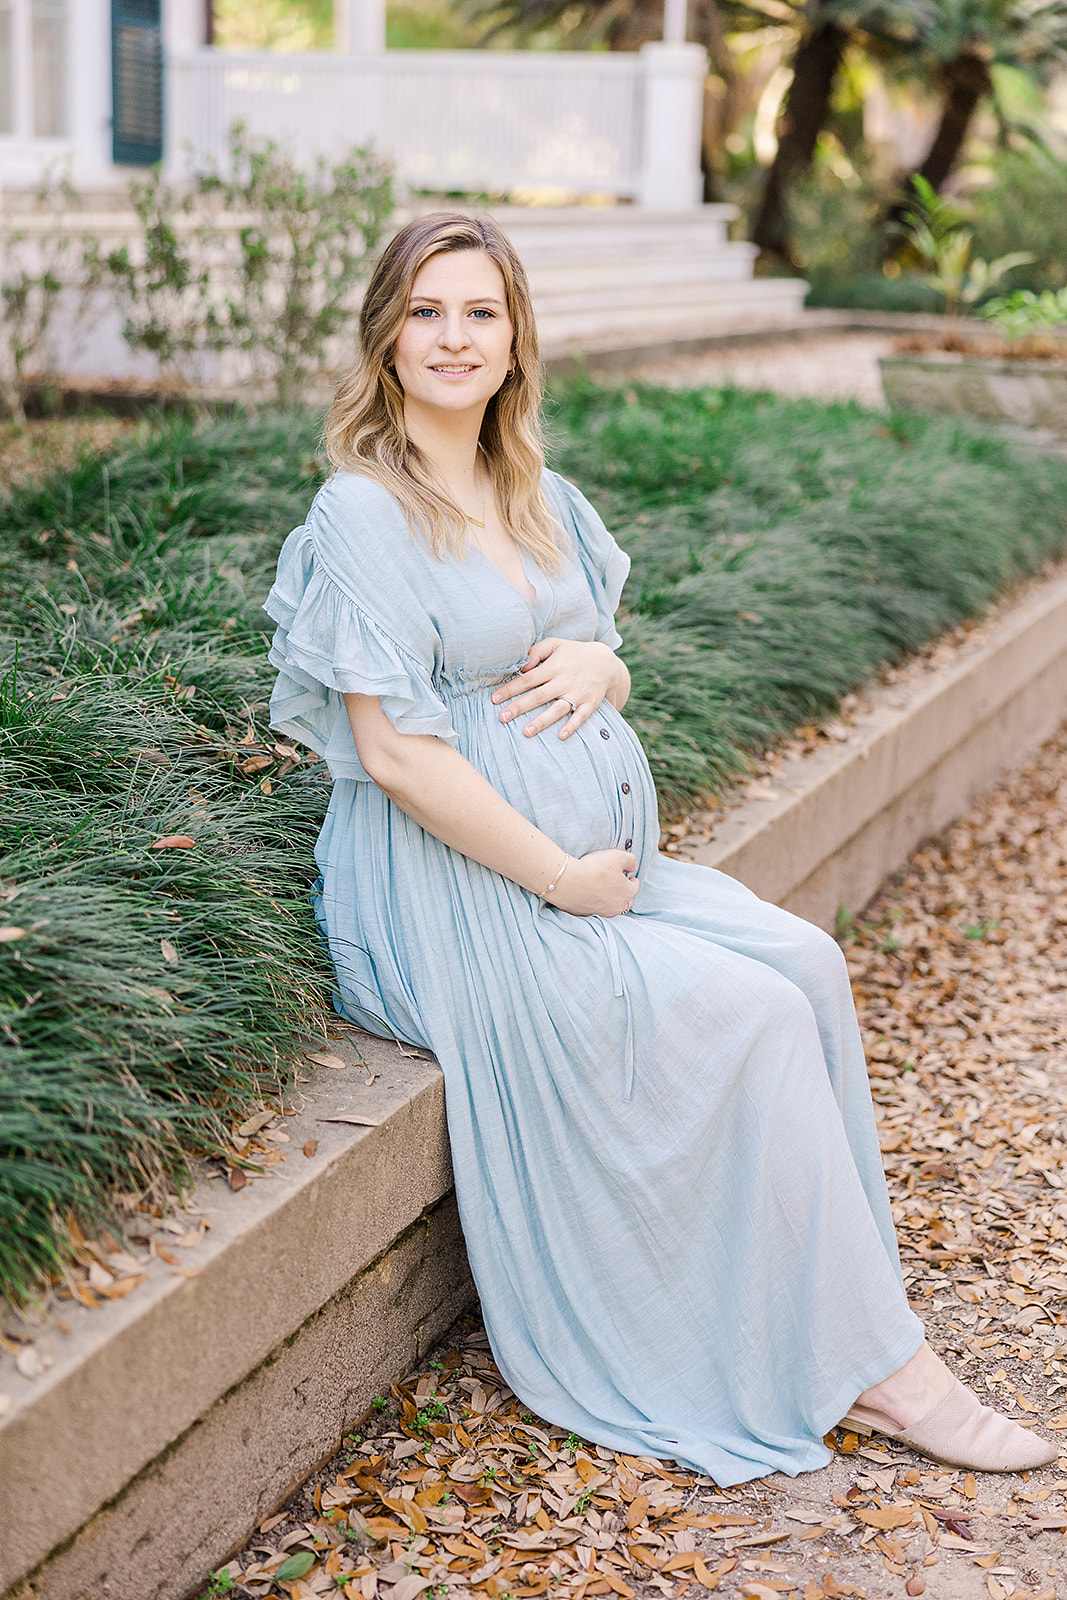 Portrait of woman in blue dress seated for maternity photos with greenery